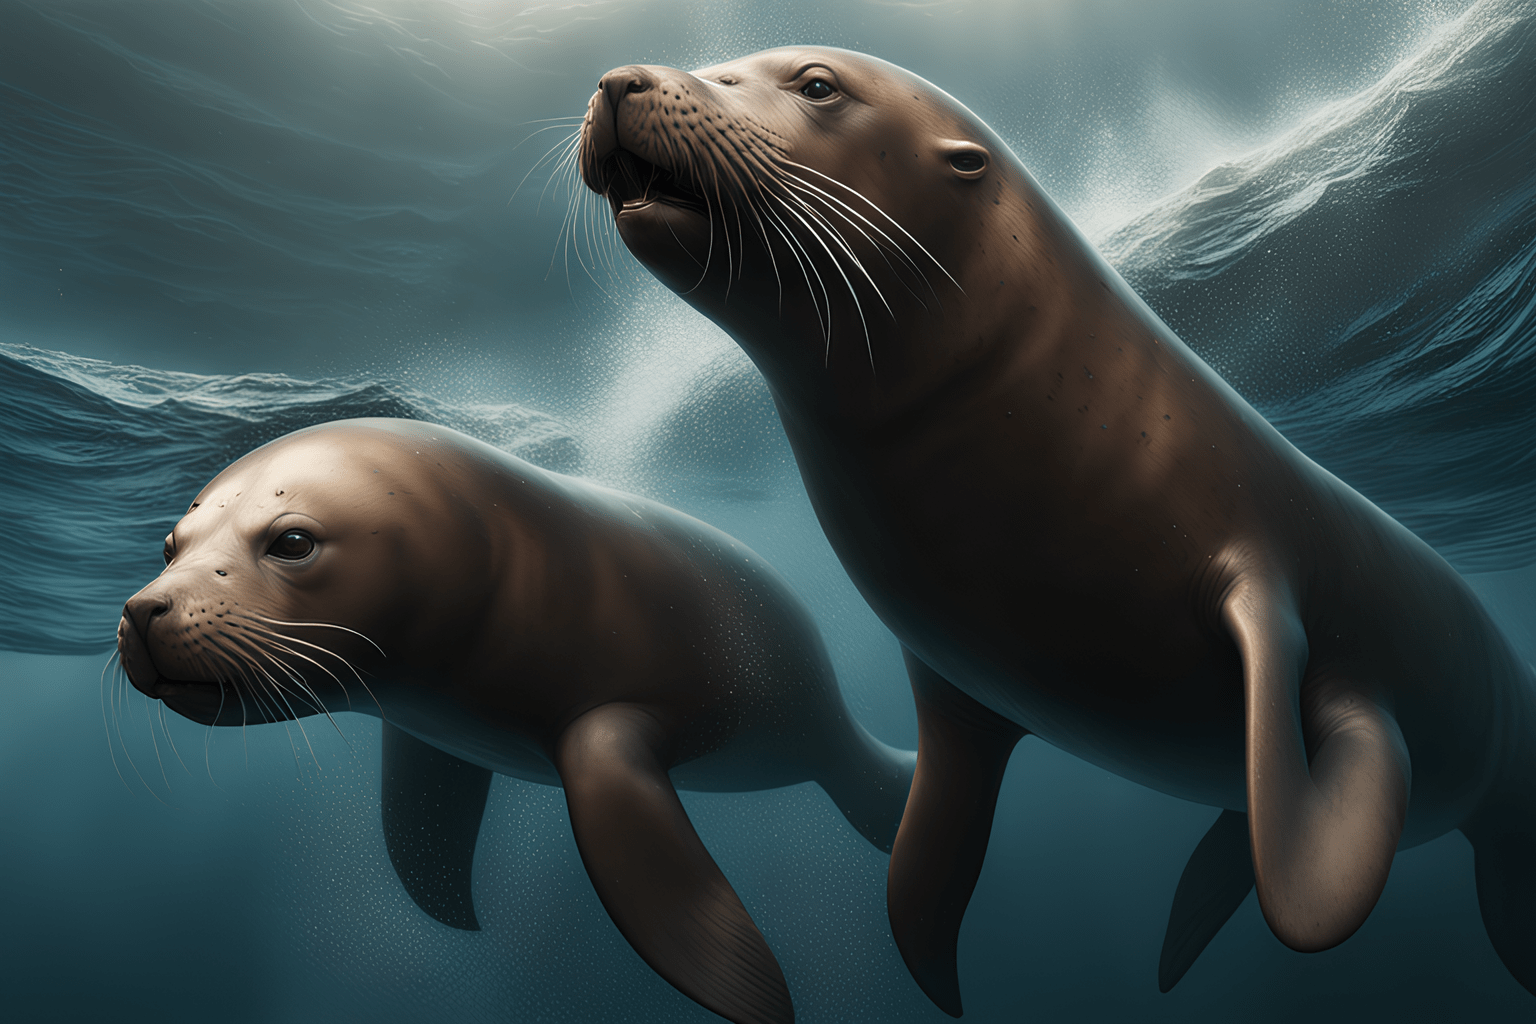 Diving with Sea Lions